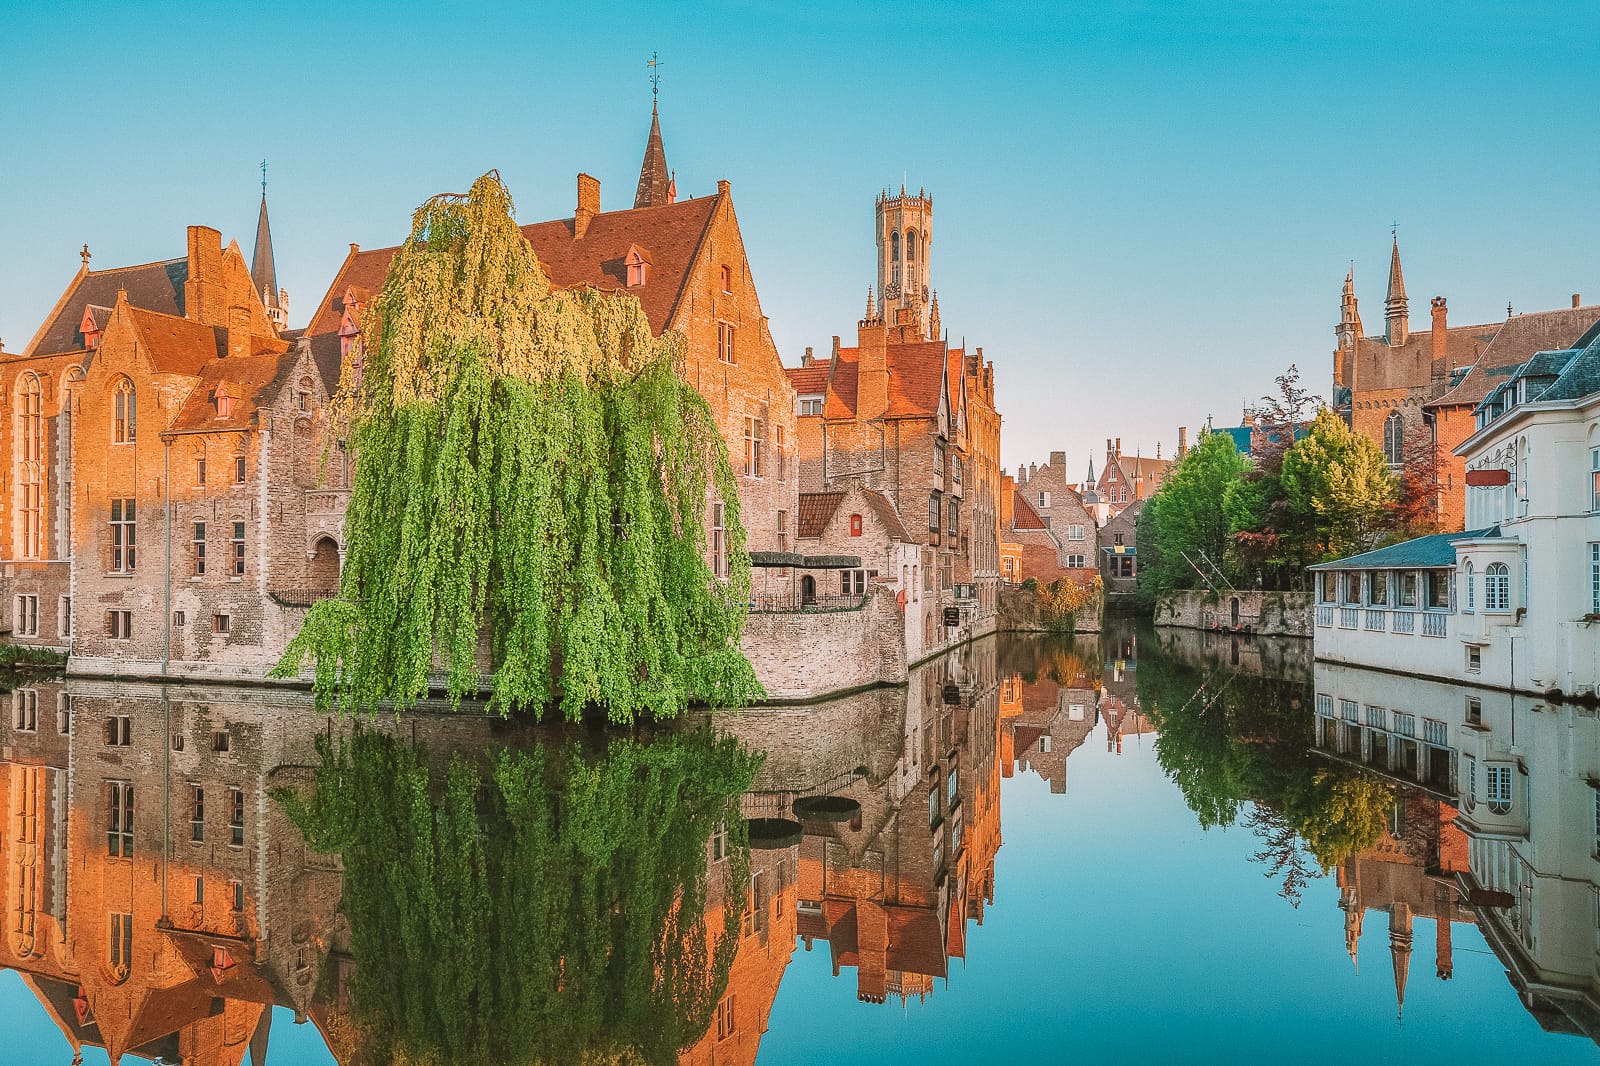 Save Tons of Miles When Traveling To Europe During Off-Peak Season. Check Out a European Destination Like Bruges, Belgium Which Is Often Called "The Venice of Northern Europe".